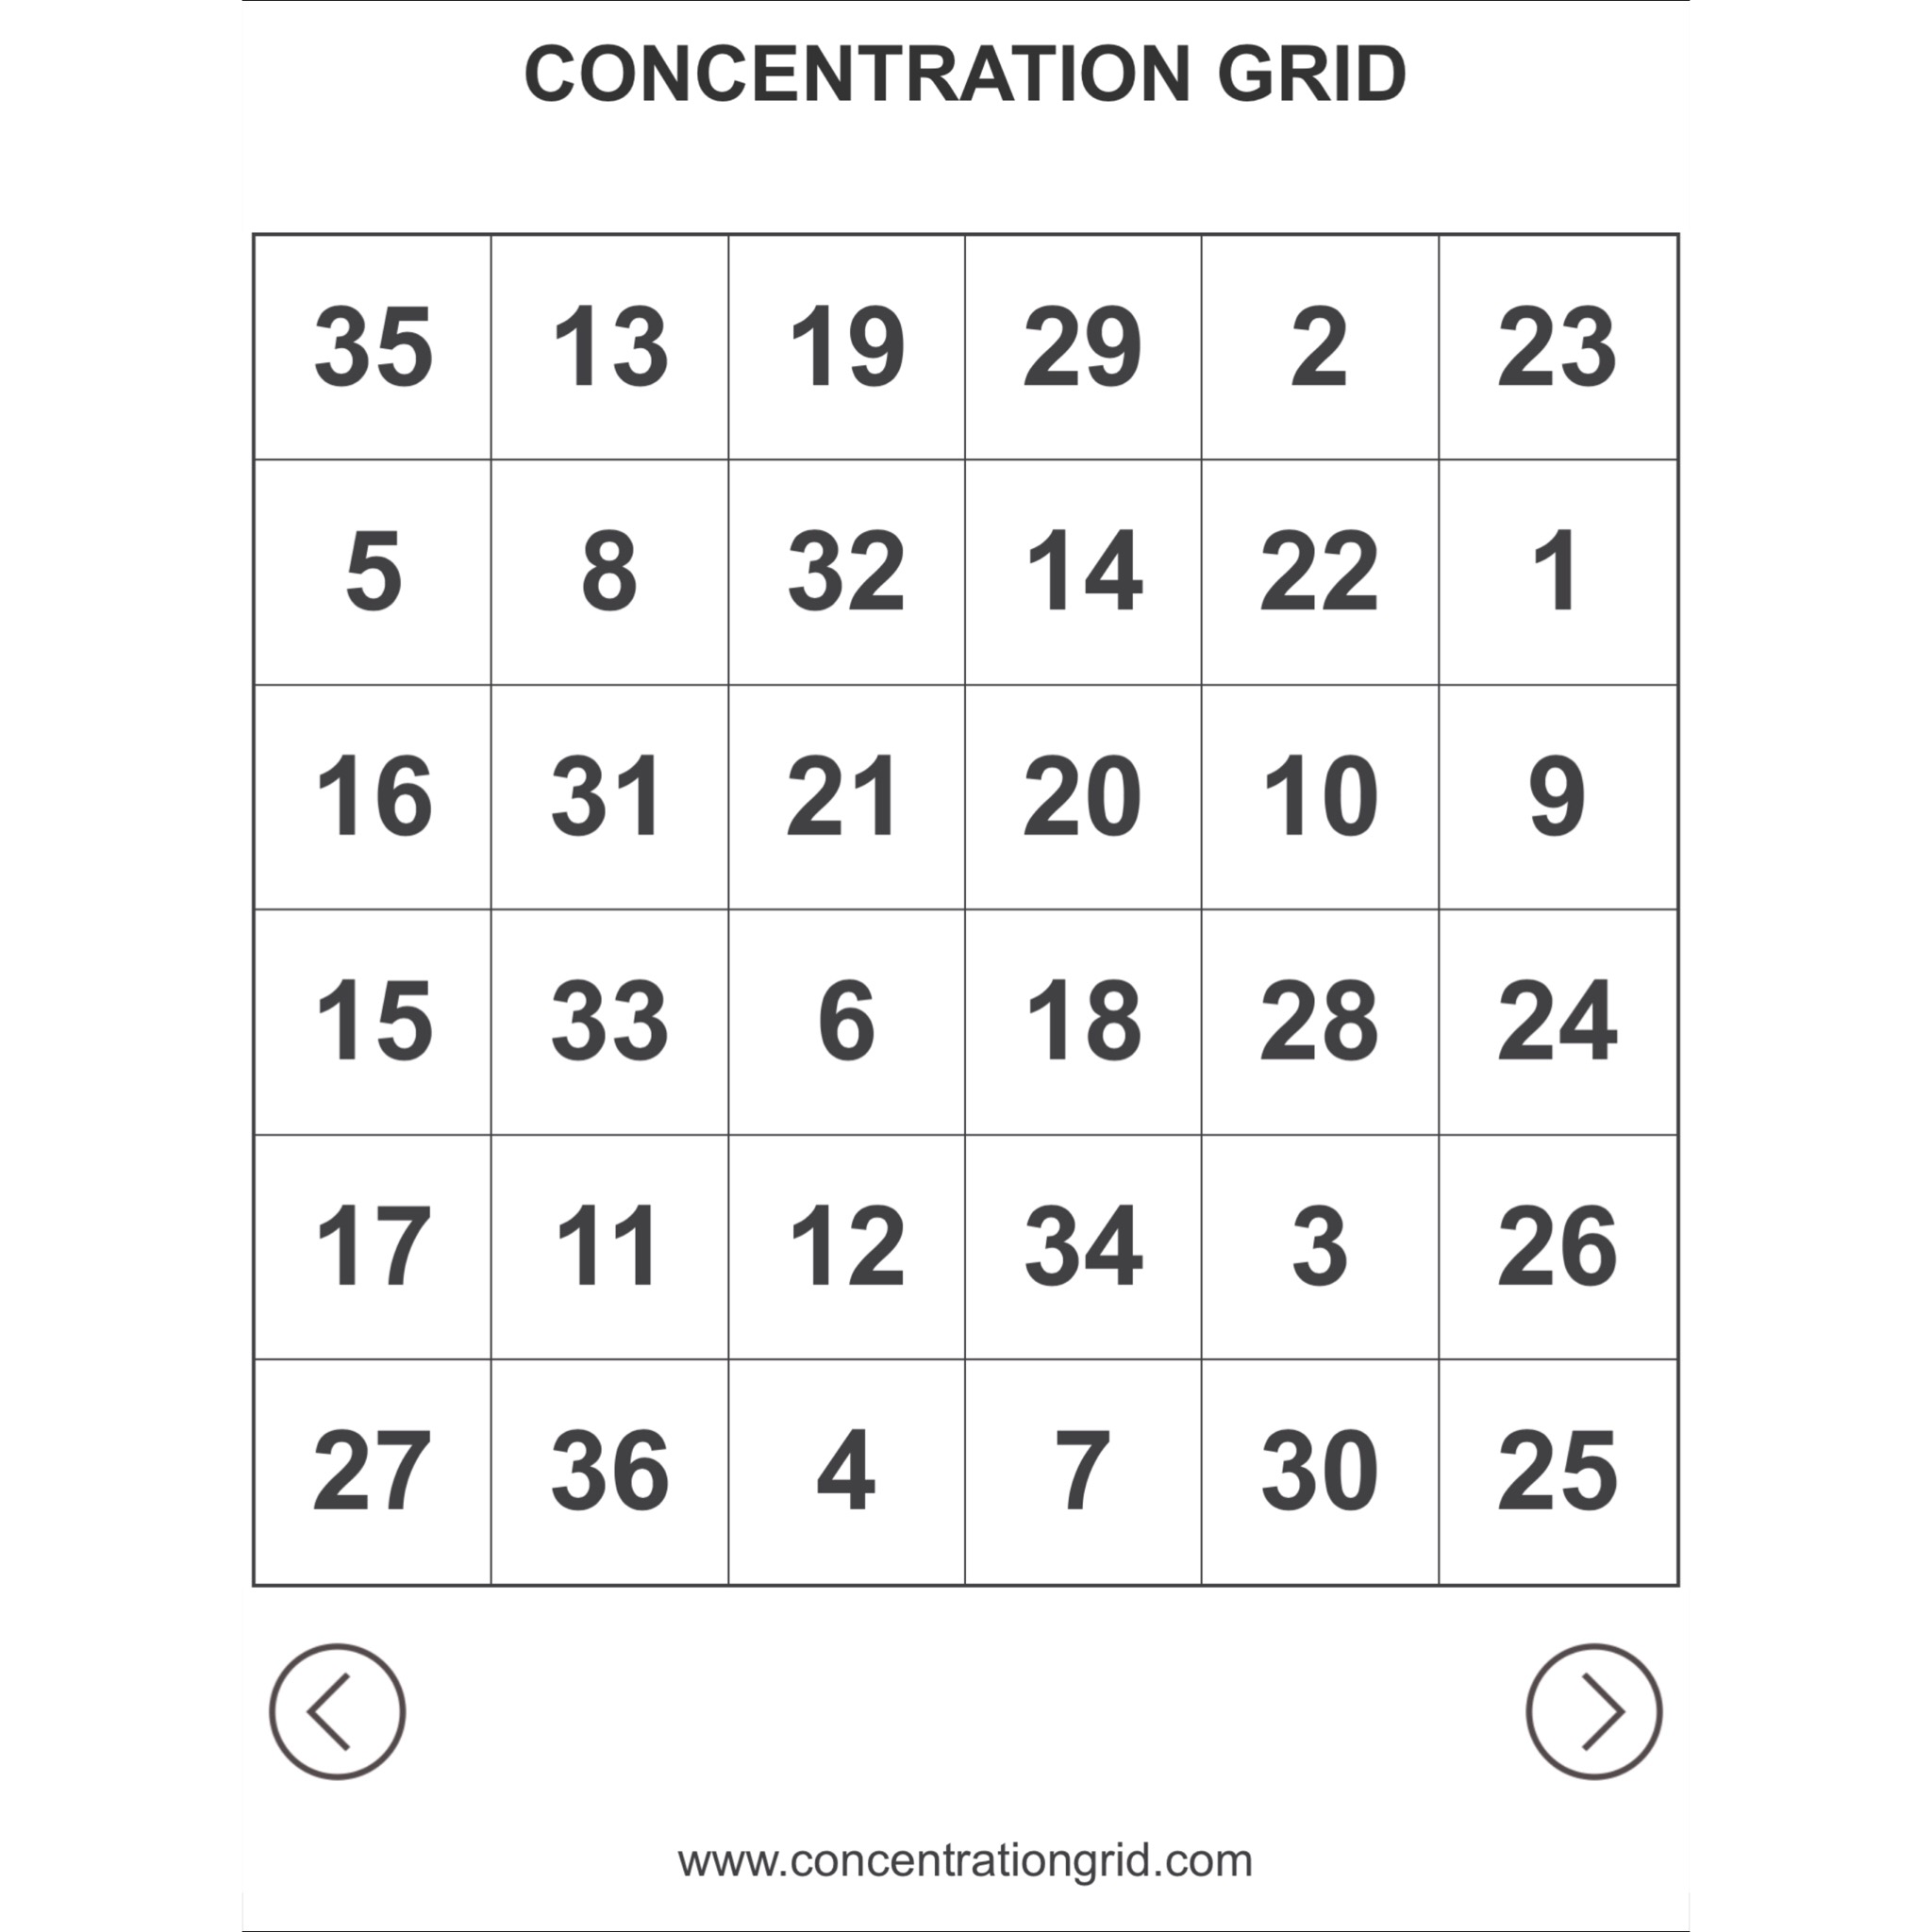 CONCENTRATION GRID is a web/mobile device app implementation of a mental skills training exercise for students, athletes, coaches, sports performance/psychology staff, trainers, teachers, parents, etc. Use concentration grids a/k/a mental focus grids with student-athletes as a tool for assessment, development, practice/exercise of attention skills ... and for competitive challenge and fun. Generate grids in varying sizes of between 3 and 14 columns/rows - small grids test speed/dexterity ... larger grids exercise focus/attention skills. Convenient gameplay/replay. History tracking (time/performance data). Share feature is integrated with social media. Post and track best gridtimes at the leaderboard. Make self-development a daily habit. #concentrationgrid #challengeyourself - concentrationgrid.com - concentrationgrid.net - tryconcentrationgrid.com